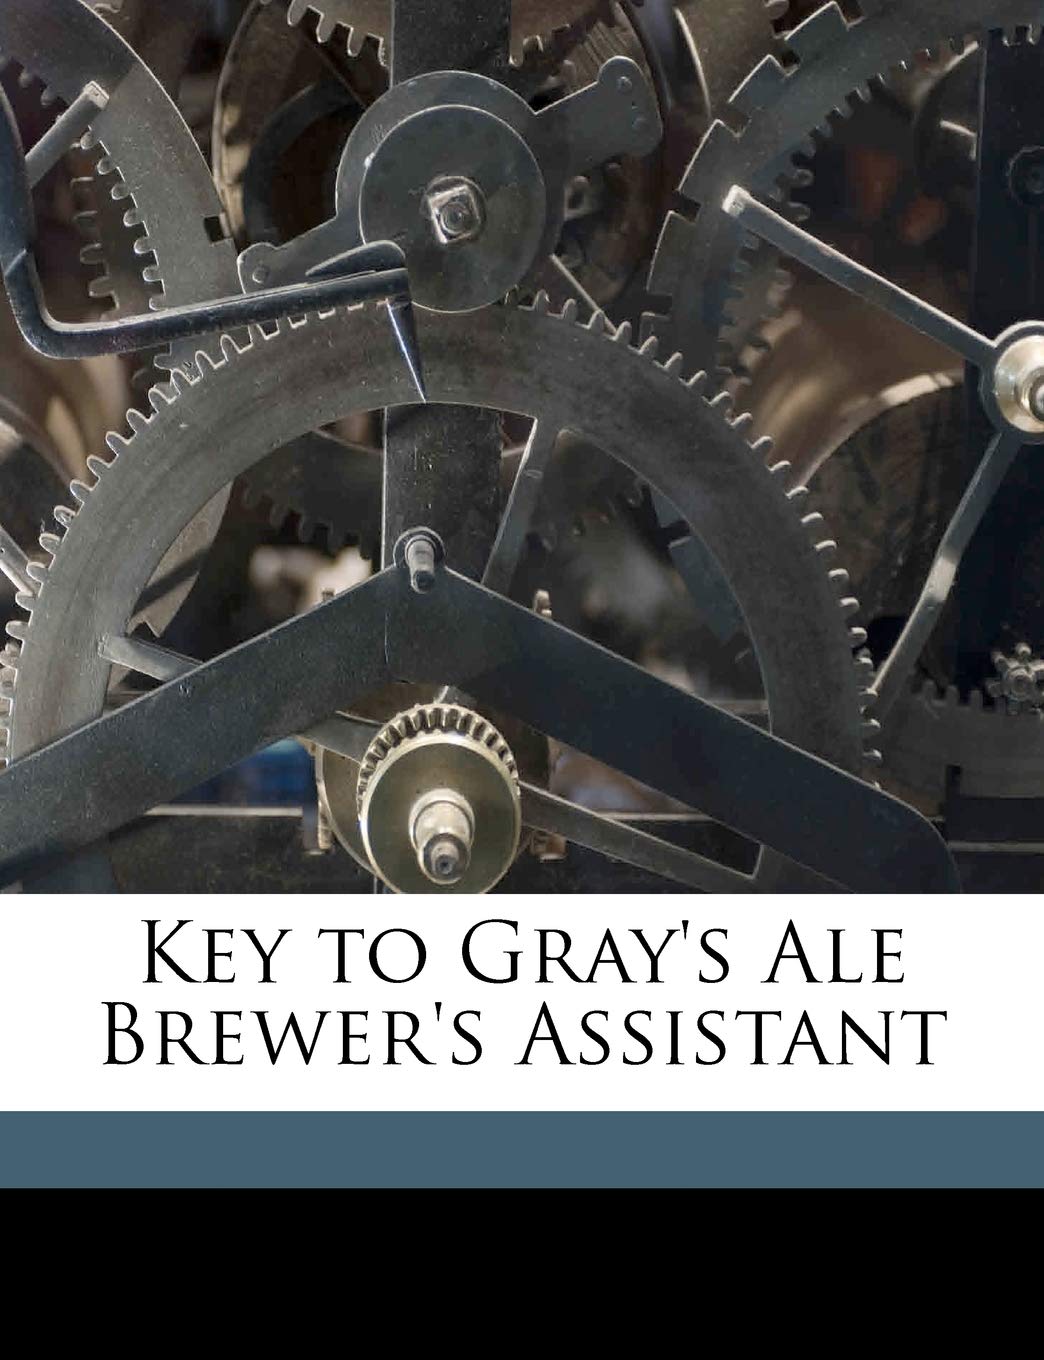 Key to Gray's Ale Brewer's Assistant